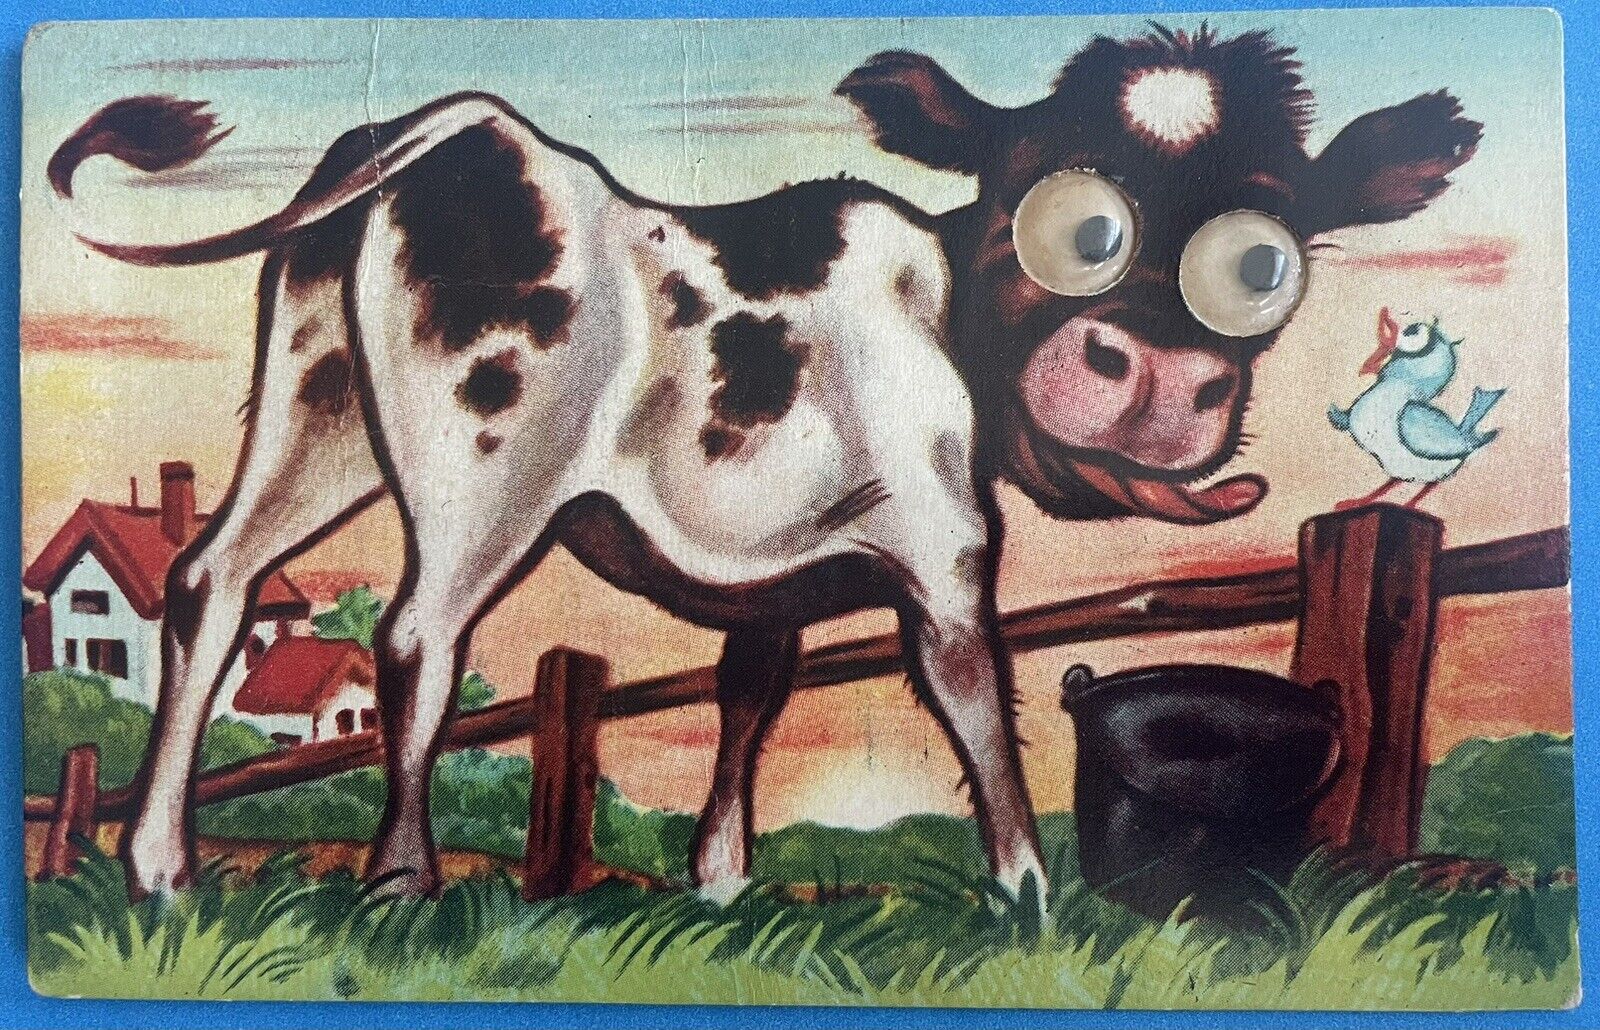 Vintage Postcard with Googly-Eyed Cow, Bird, and Squeaker - 1950s Farm Scene